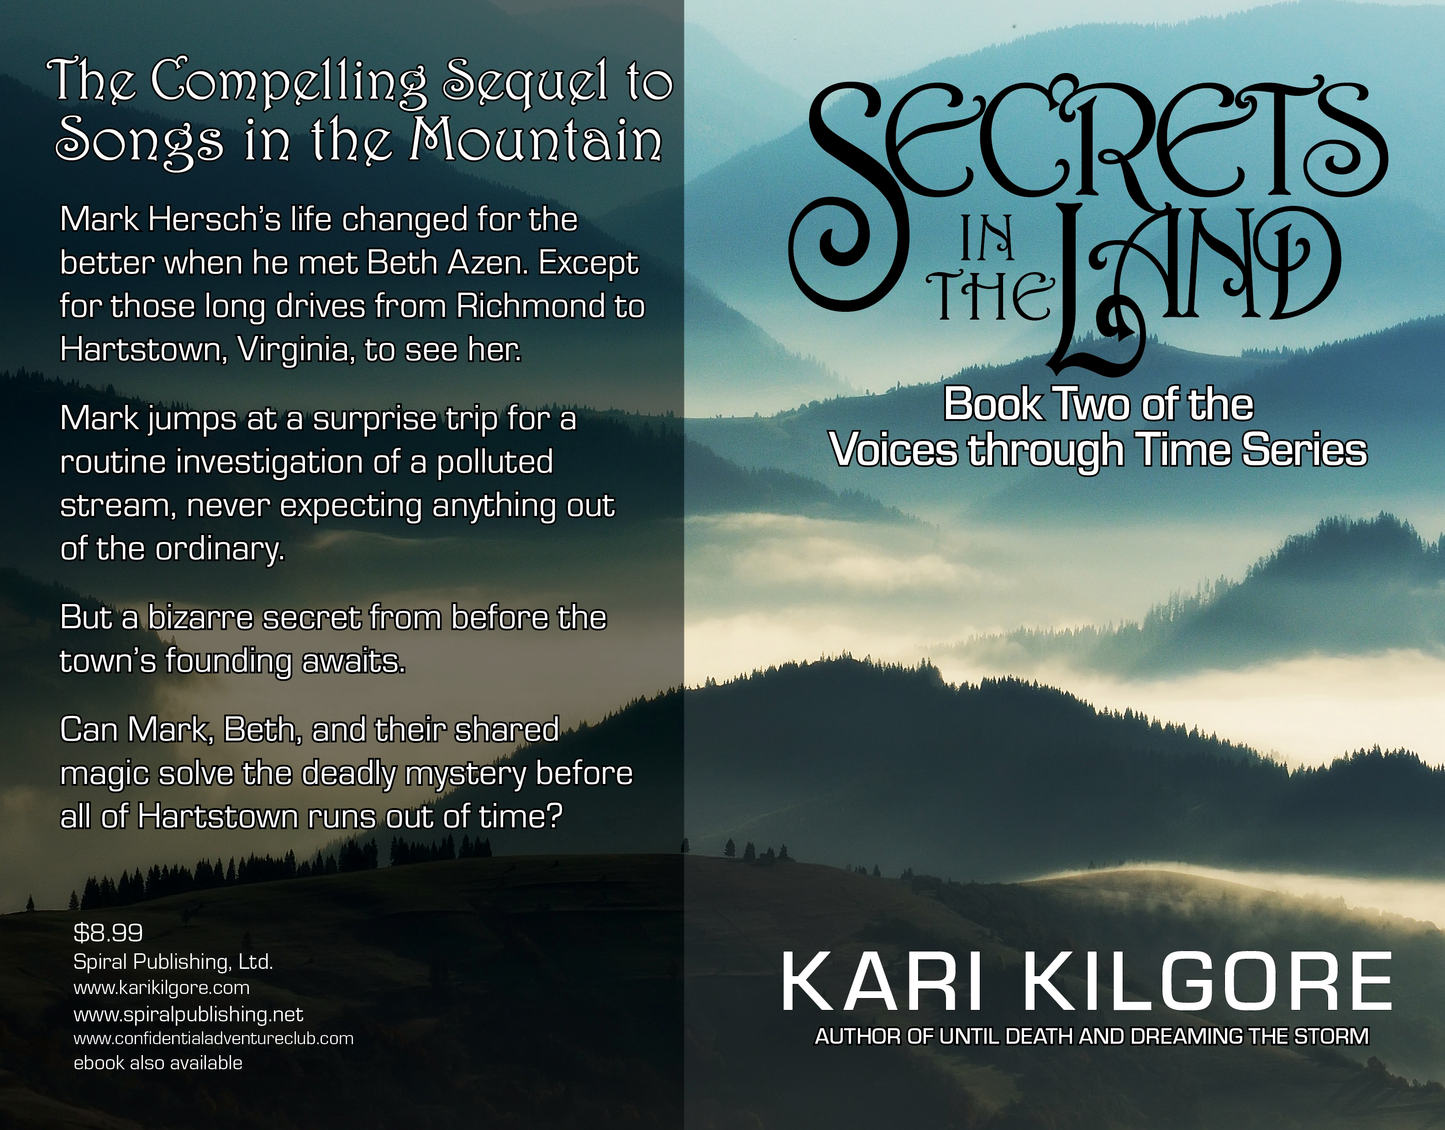 Secrets in the Land: Book Two of the Voices through Time Series